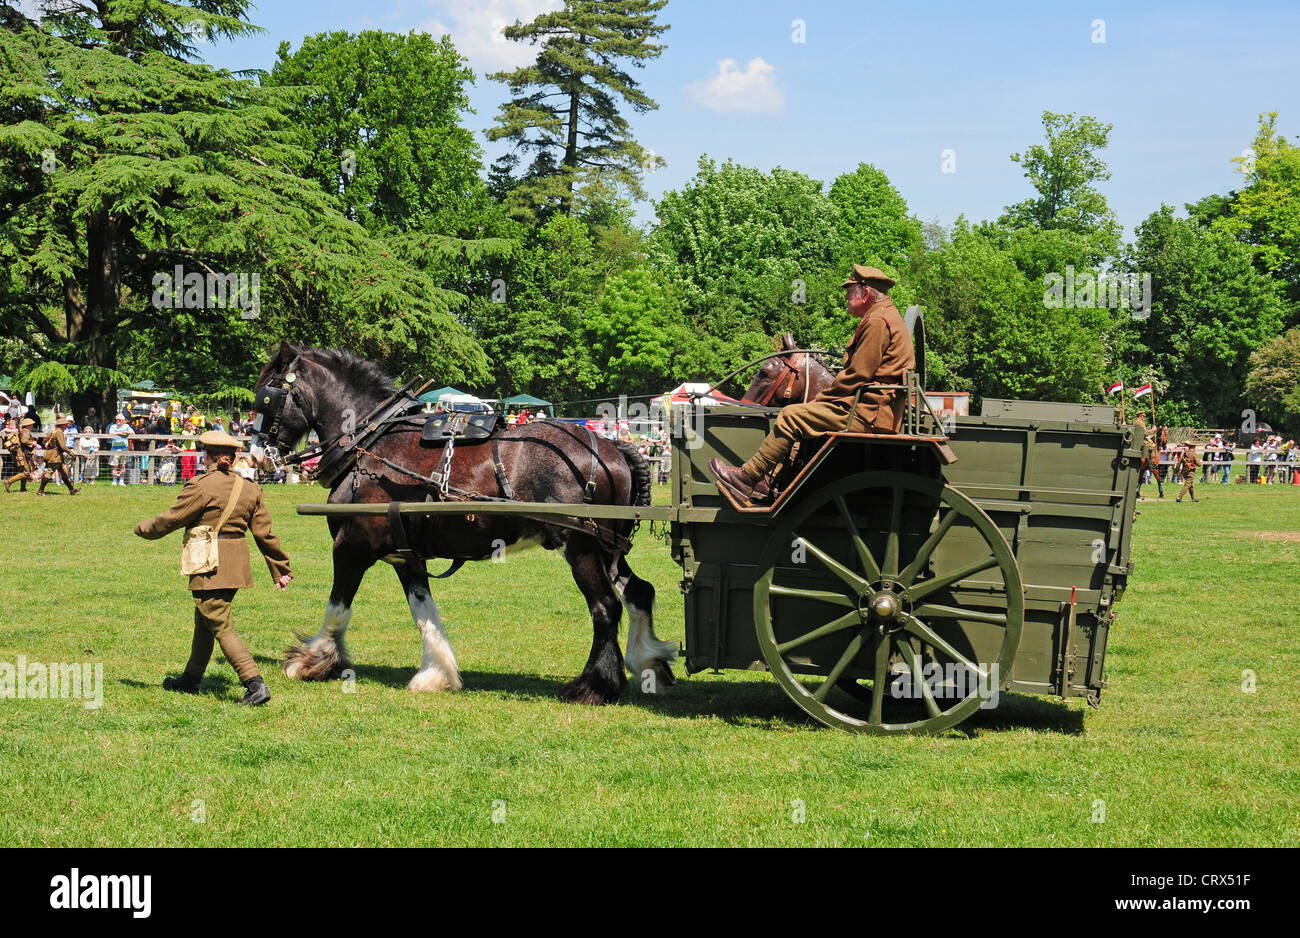 Shire horse pulling World War One horse ambulance during a display. Stock Photo